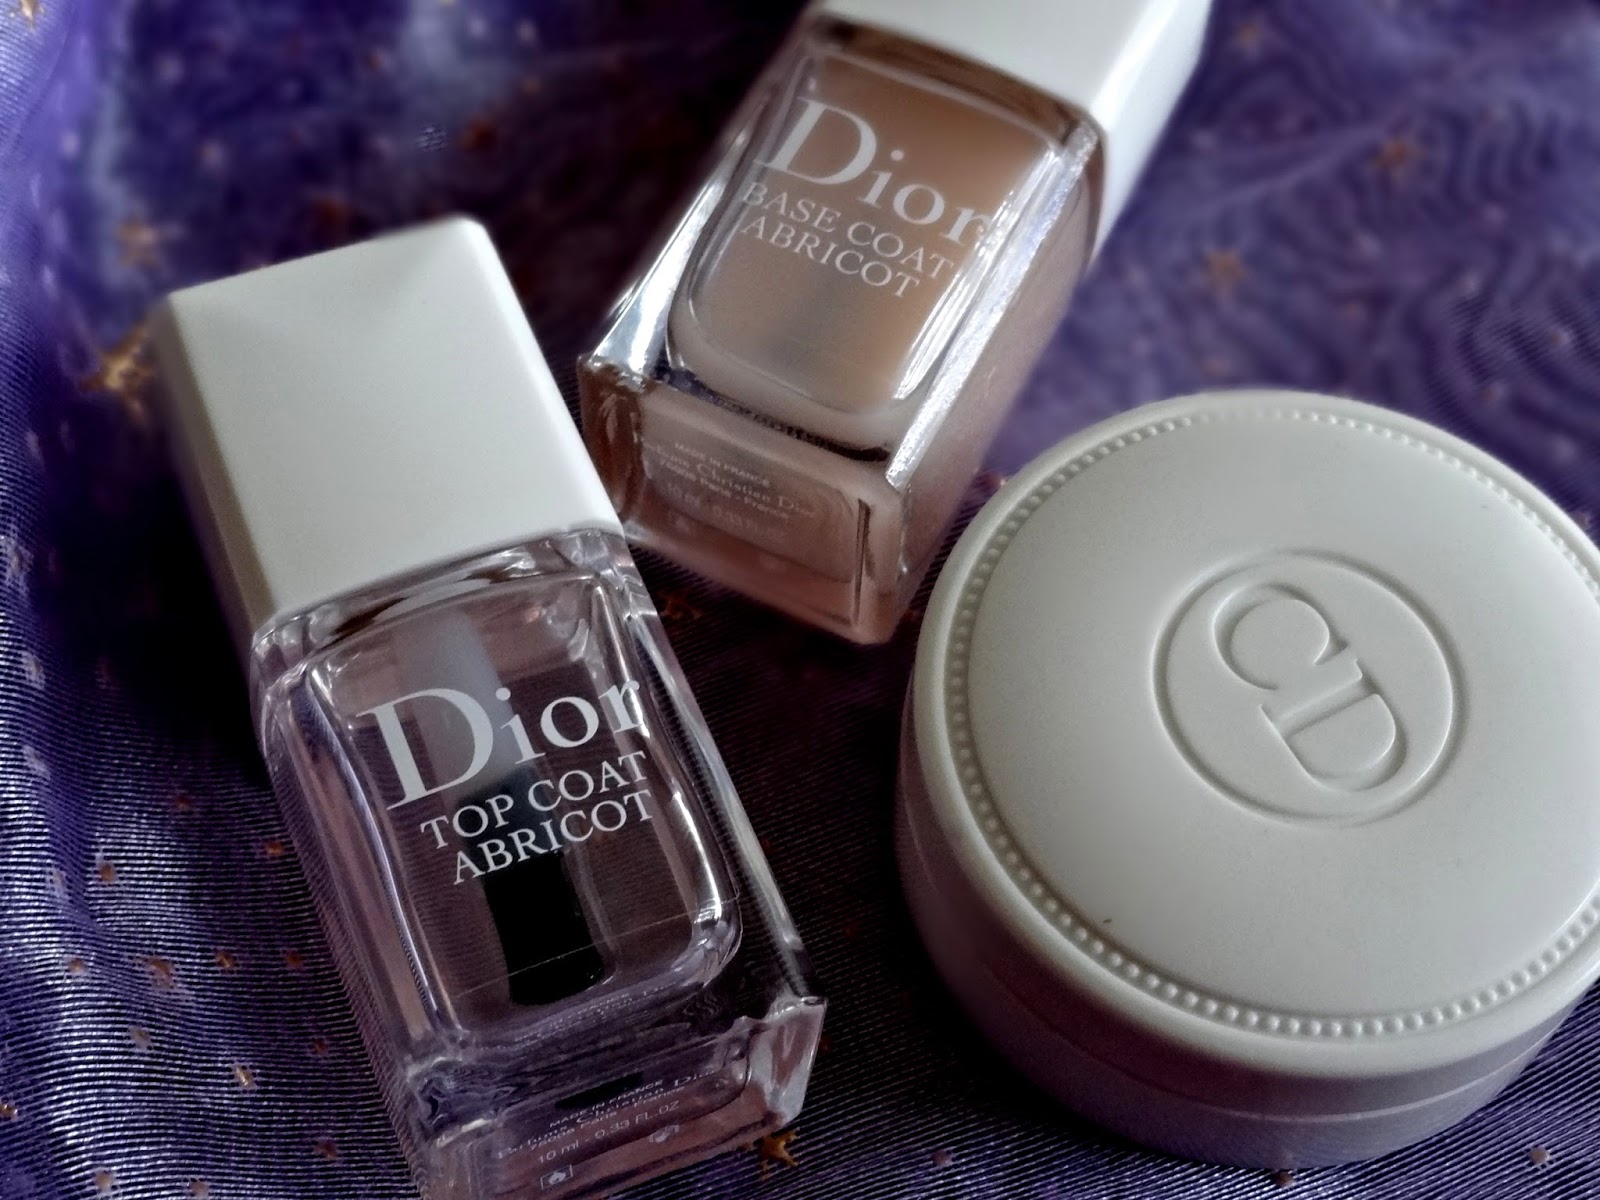 Stavning forskel glans Makeup, Beauty and More: Dior Abricot Manicure Favorites | Top Coat Abricot,  Base Coat Abricot and Fortifying Cream For Nails